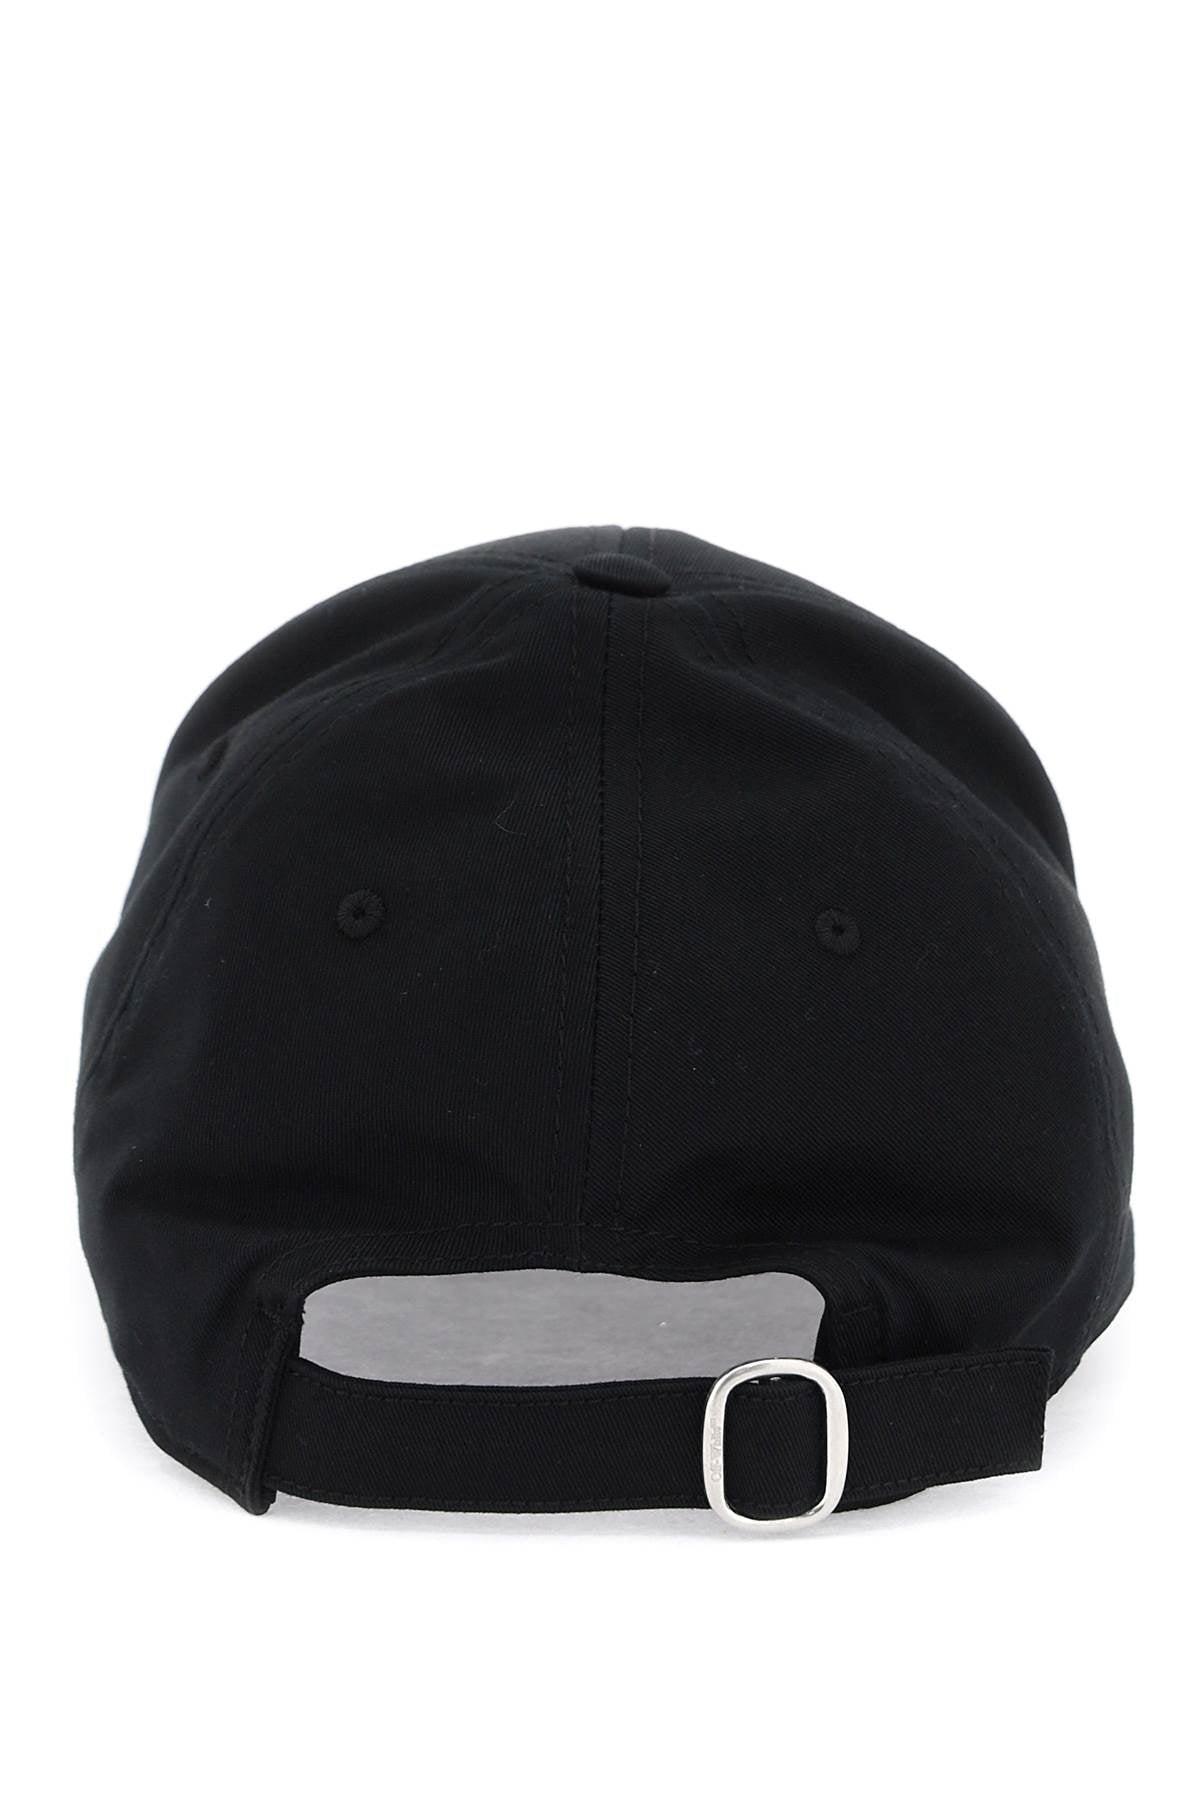 Off-white embroidered logo baseball cap with-2